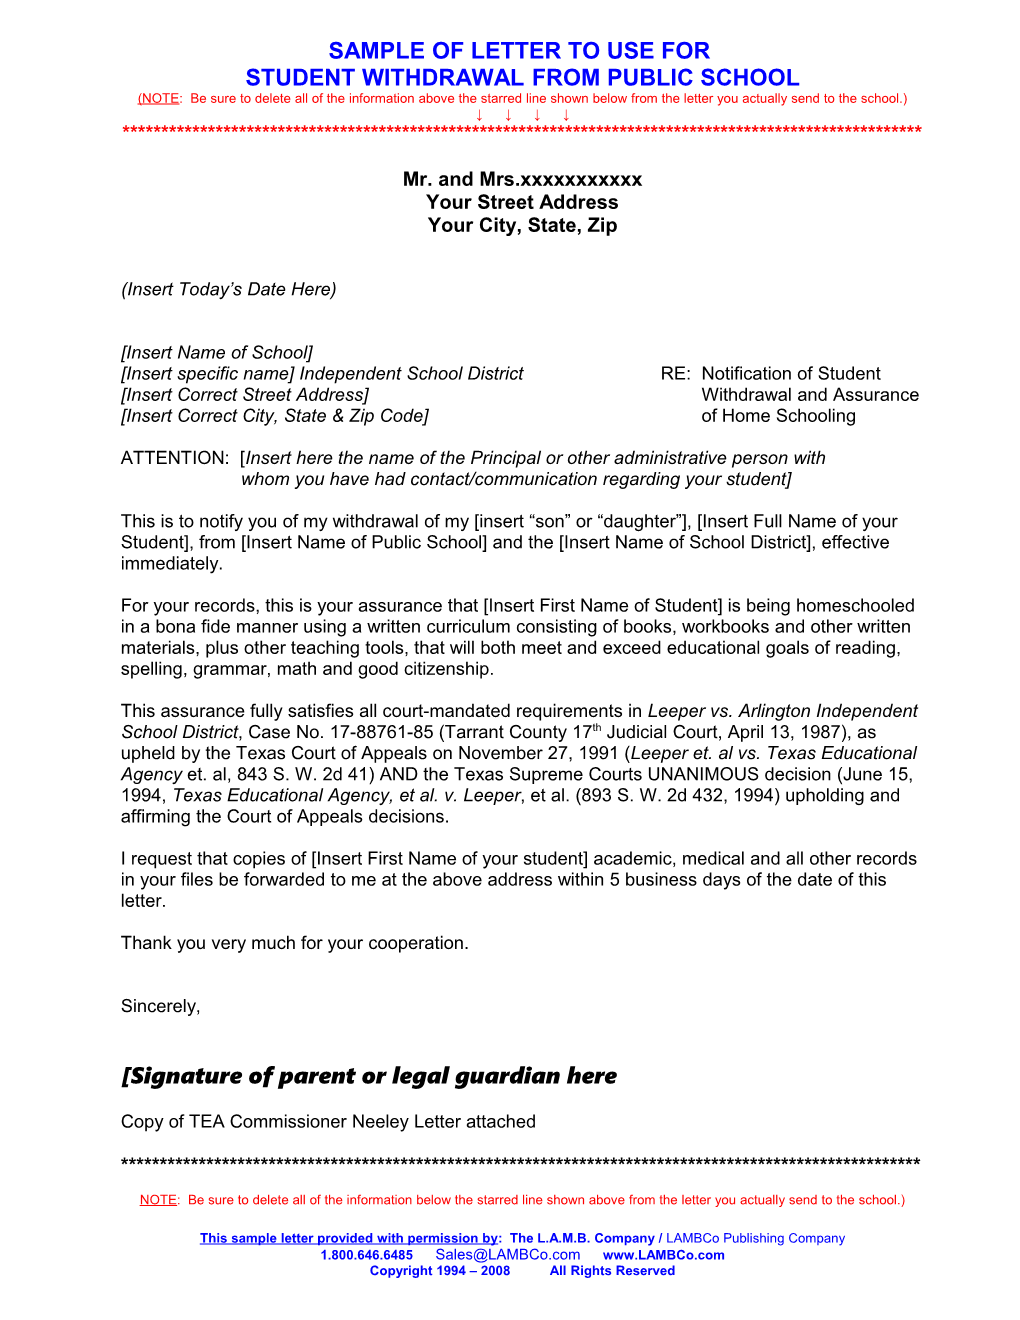 Sample Letter for Student Withdrawal from Public School